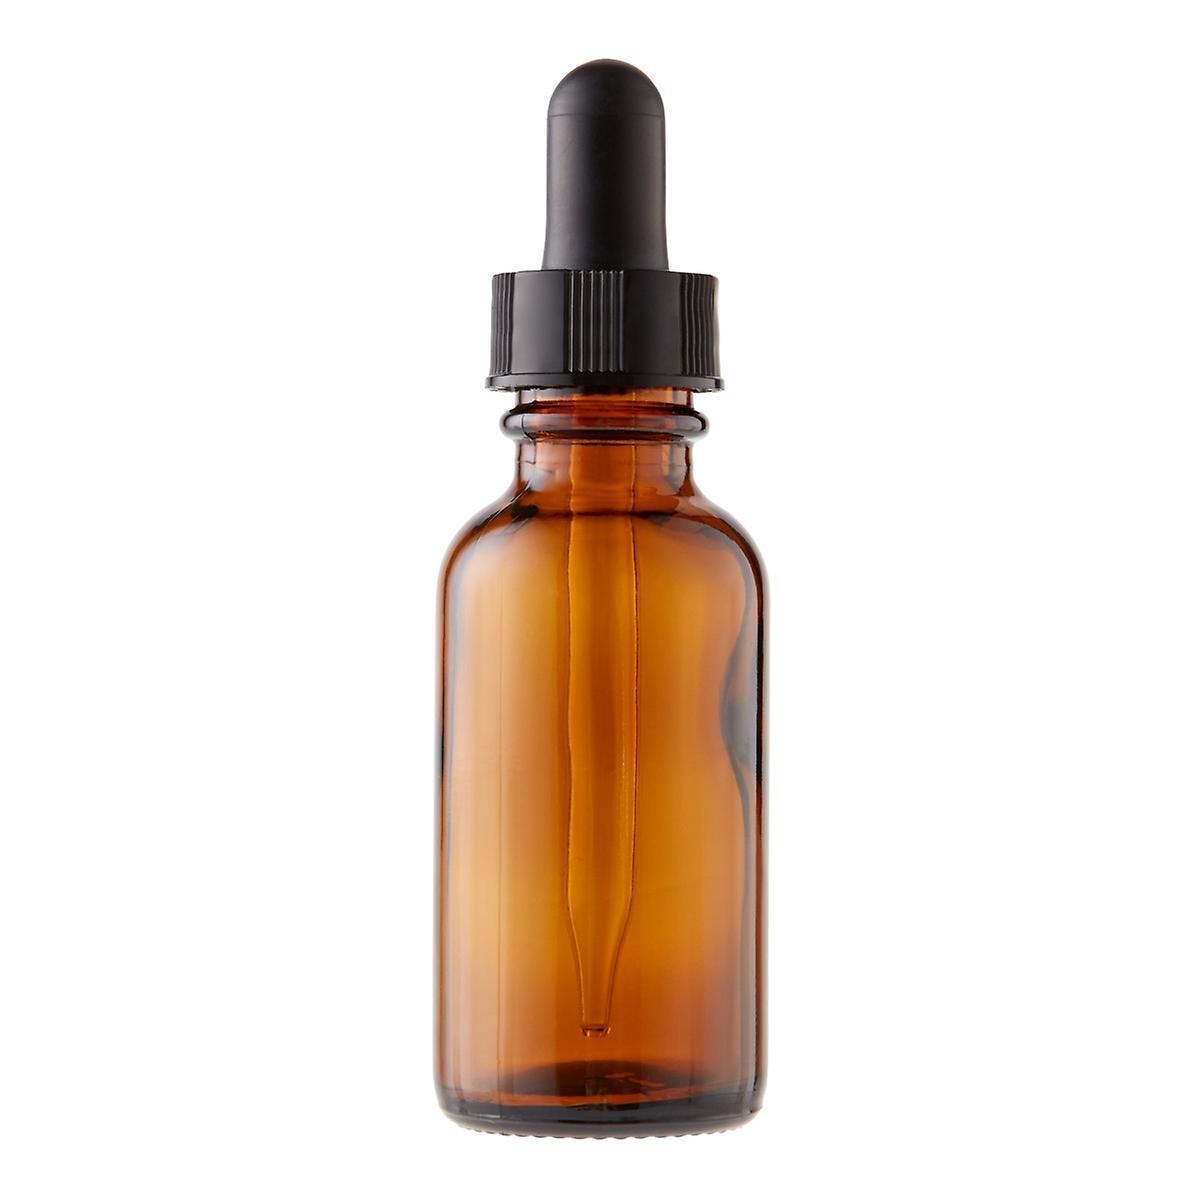 15ml Tincture (Alcohol Based)